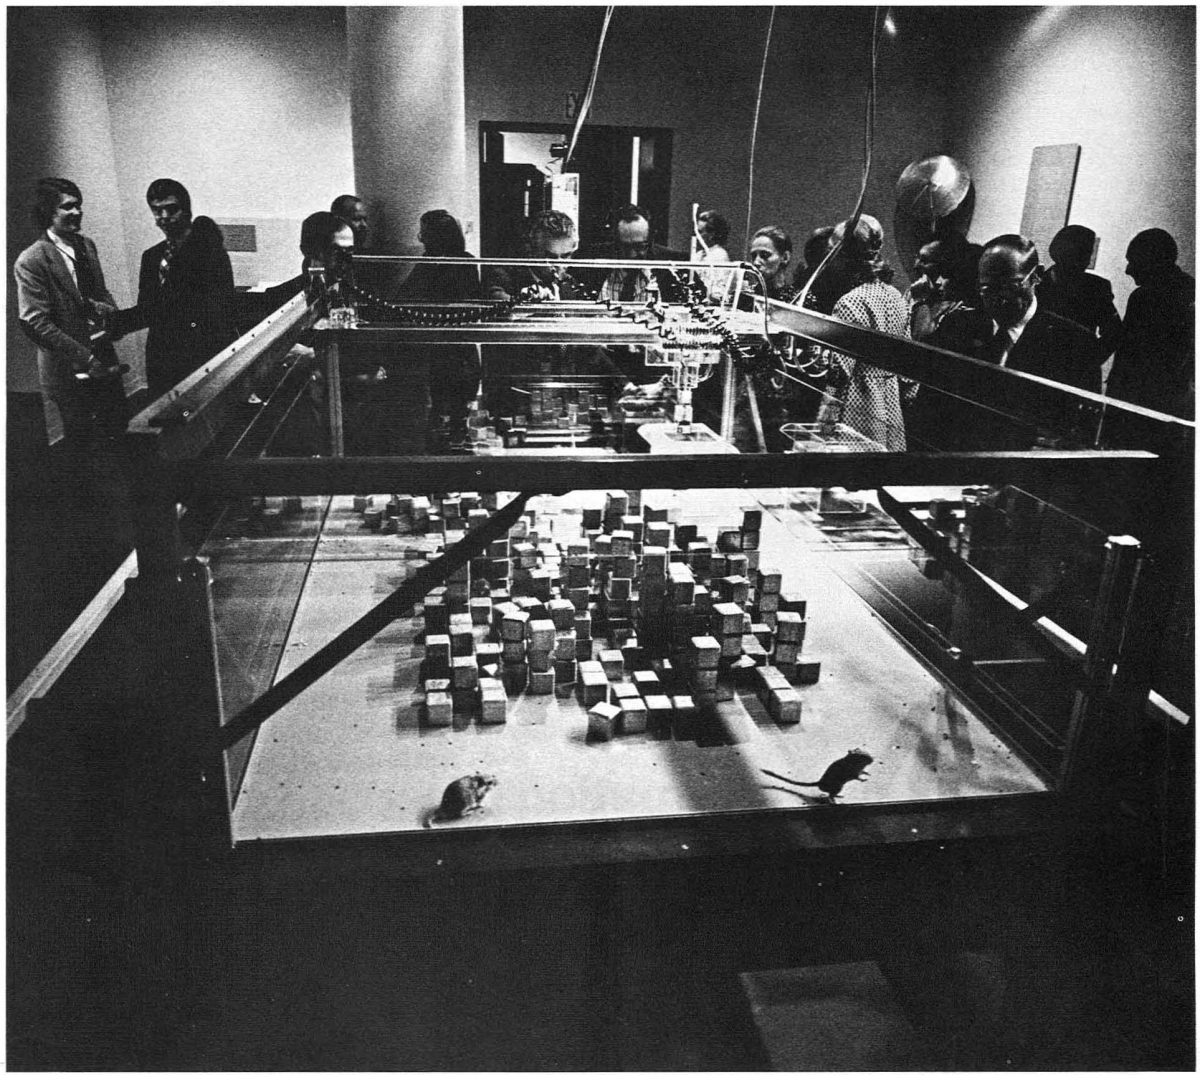 The 1970 experiment SEEK by the Architecture Machine Group. Photo from the catalog of the exhibition SOFTWARE at the New York Jewish Museum.